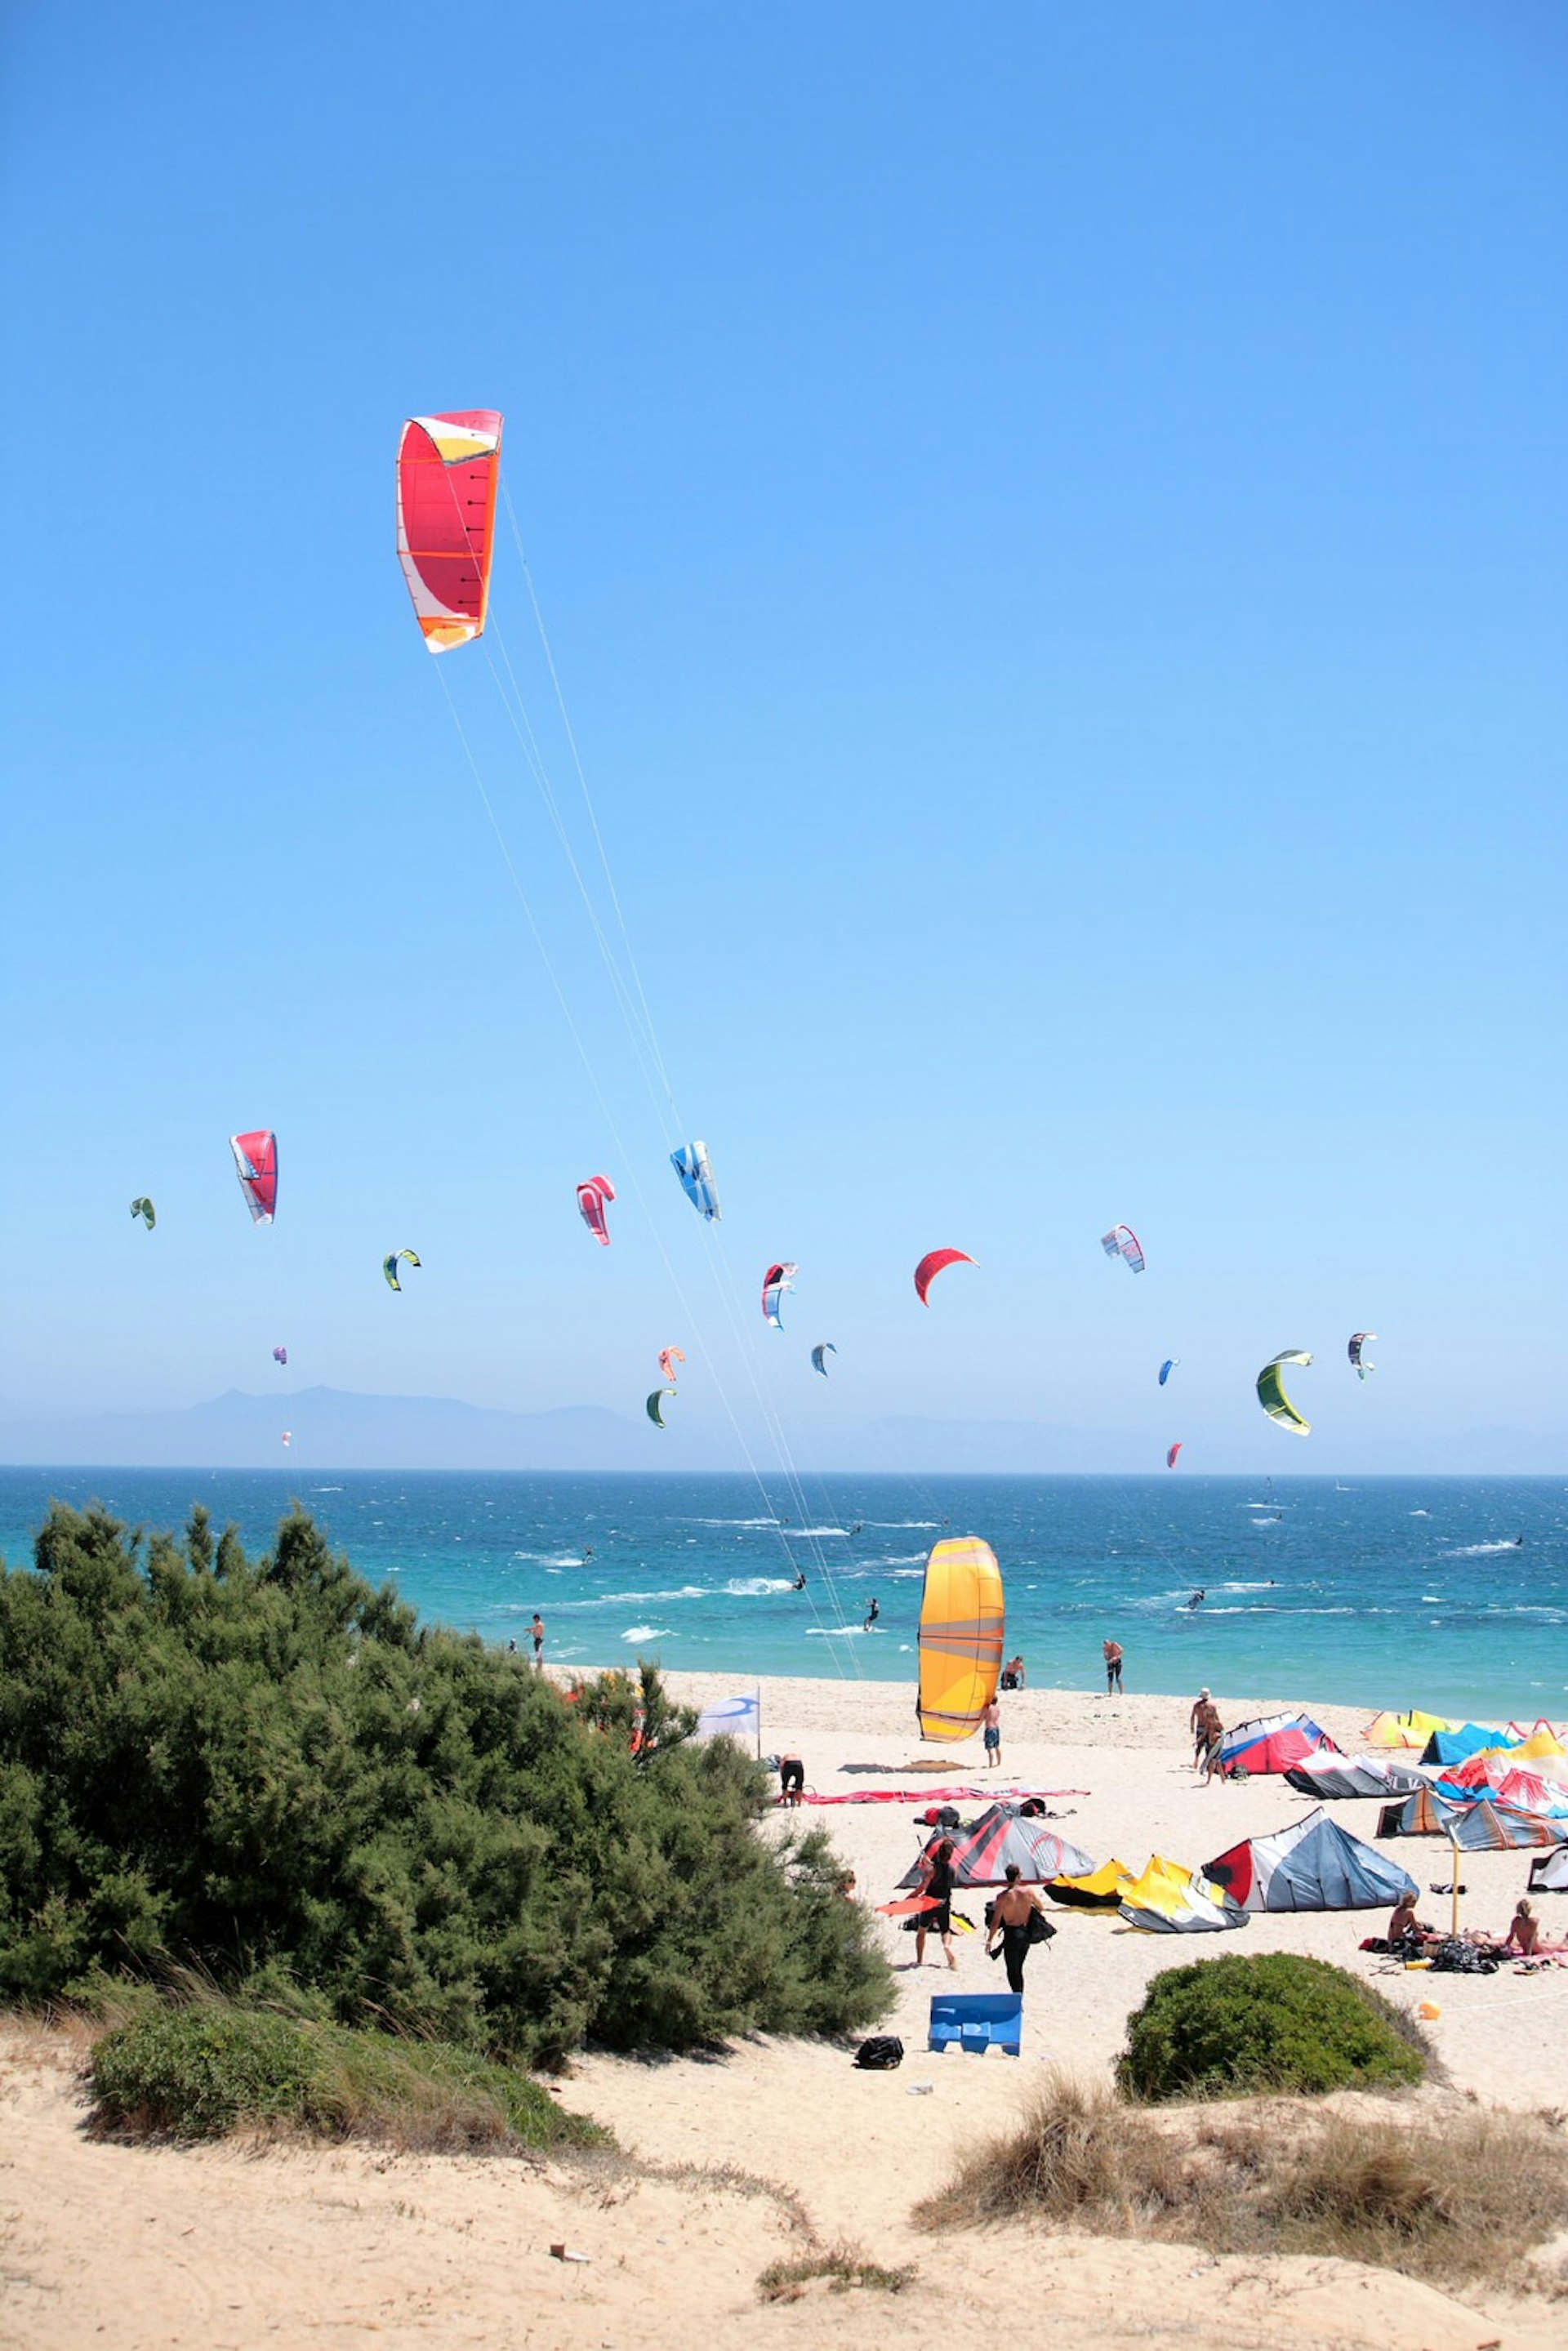 Tarifa beach packed with kite surfers and sunbathers, Colourful kites and tents stand out against the clear blue sky and white sand beach. 